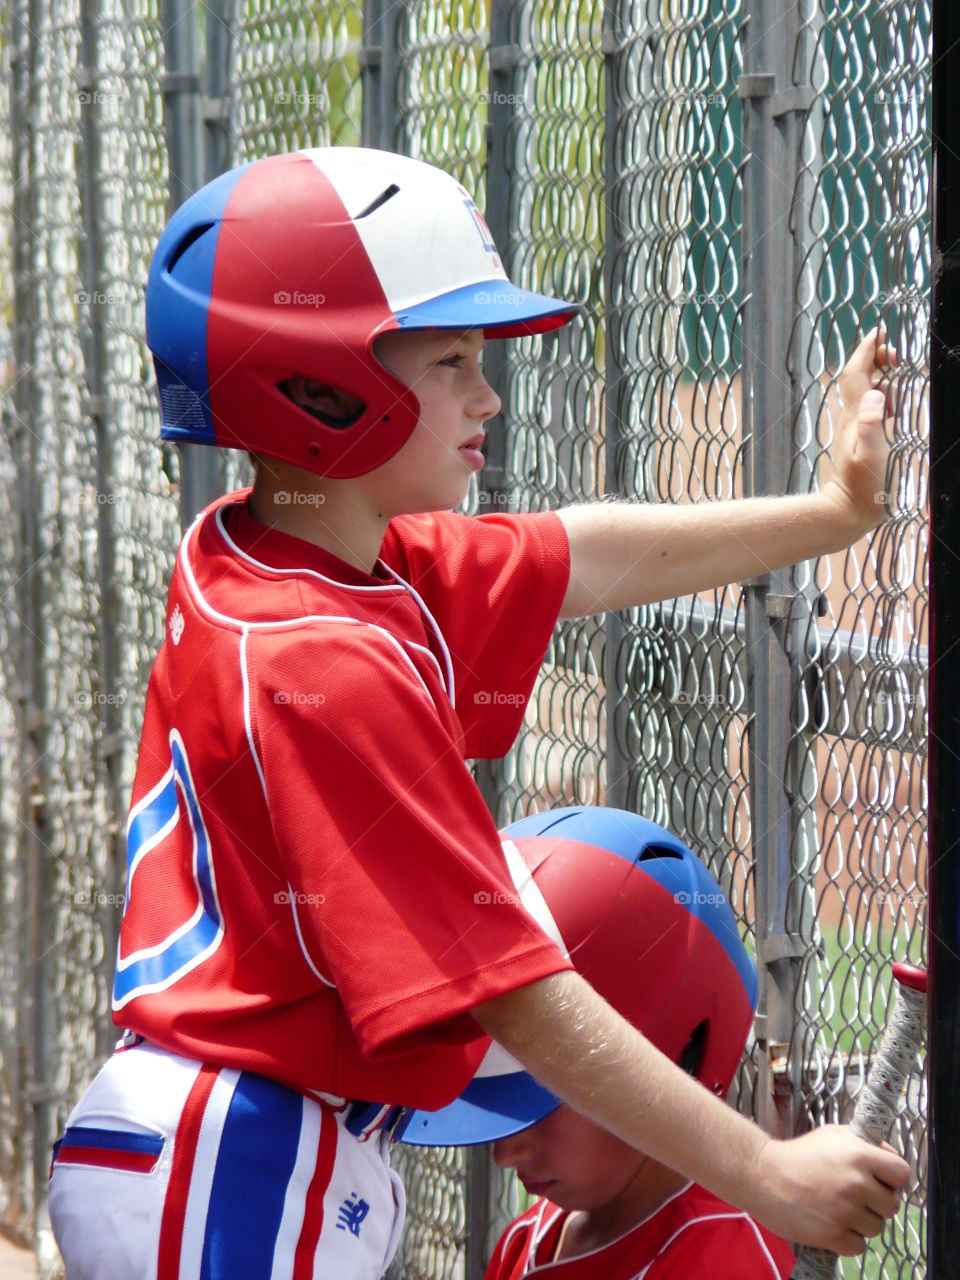 Youth baseball player in the dugout. 